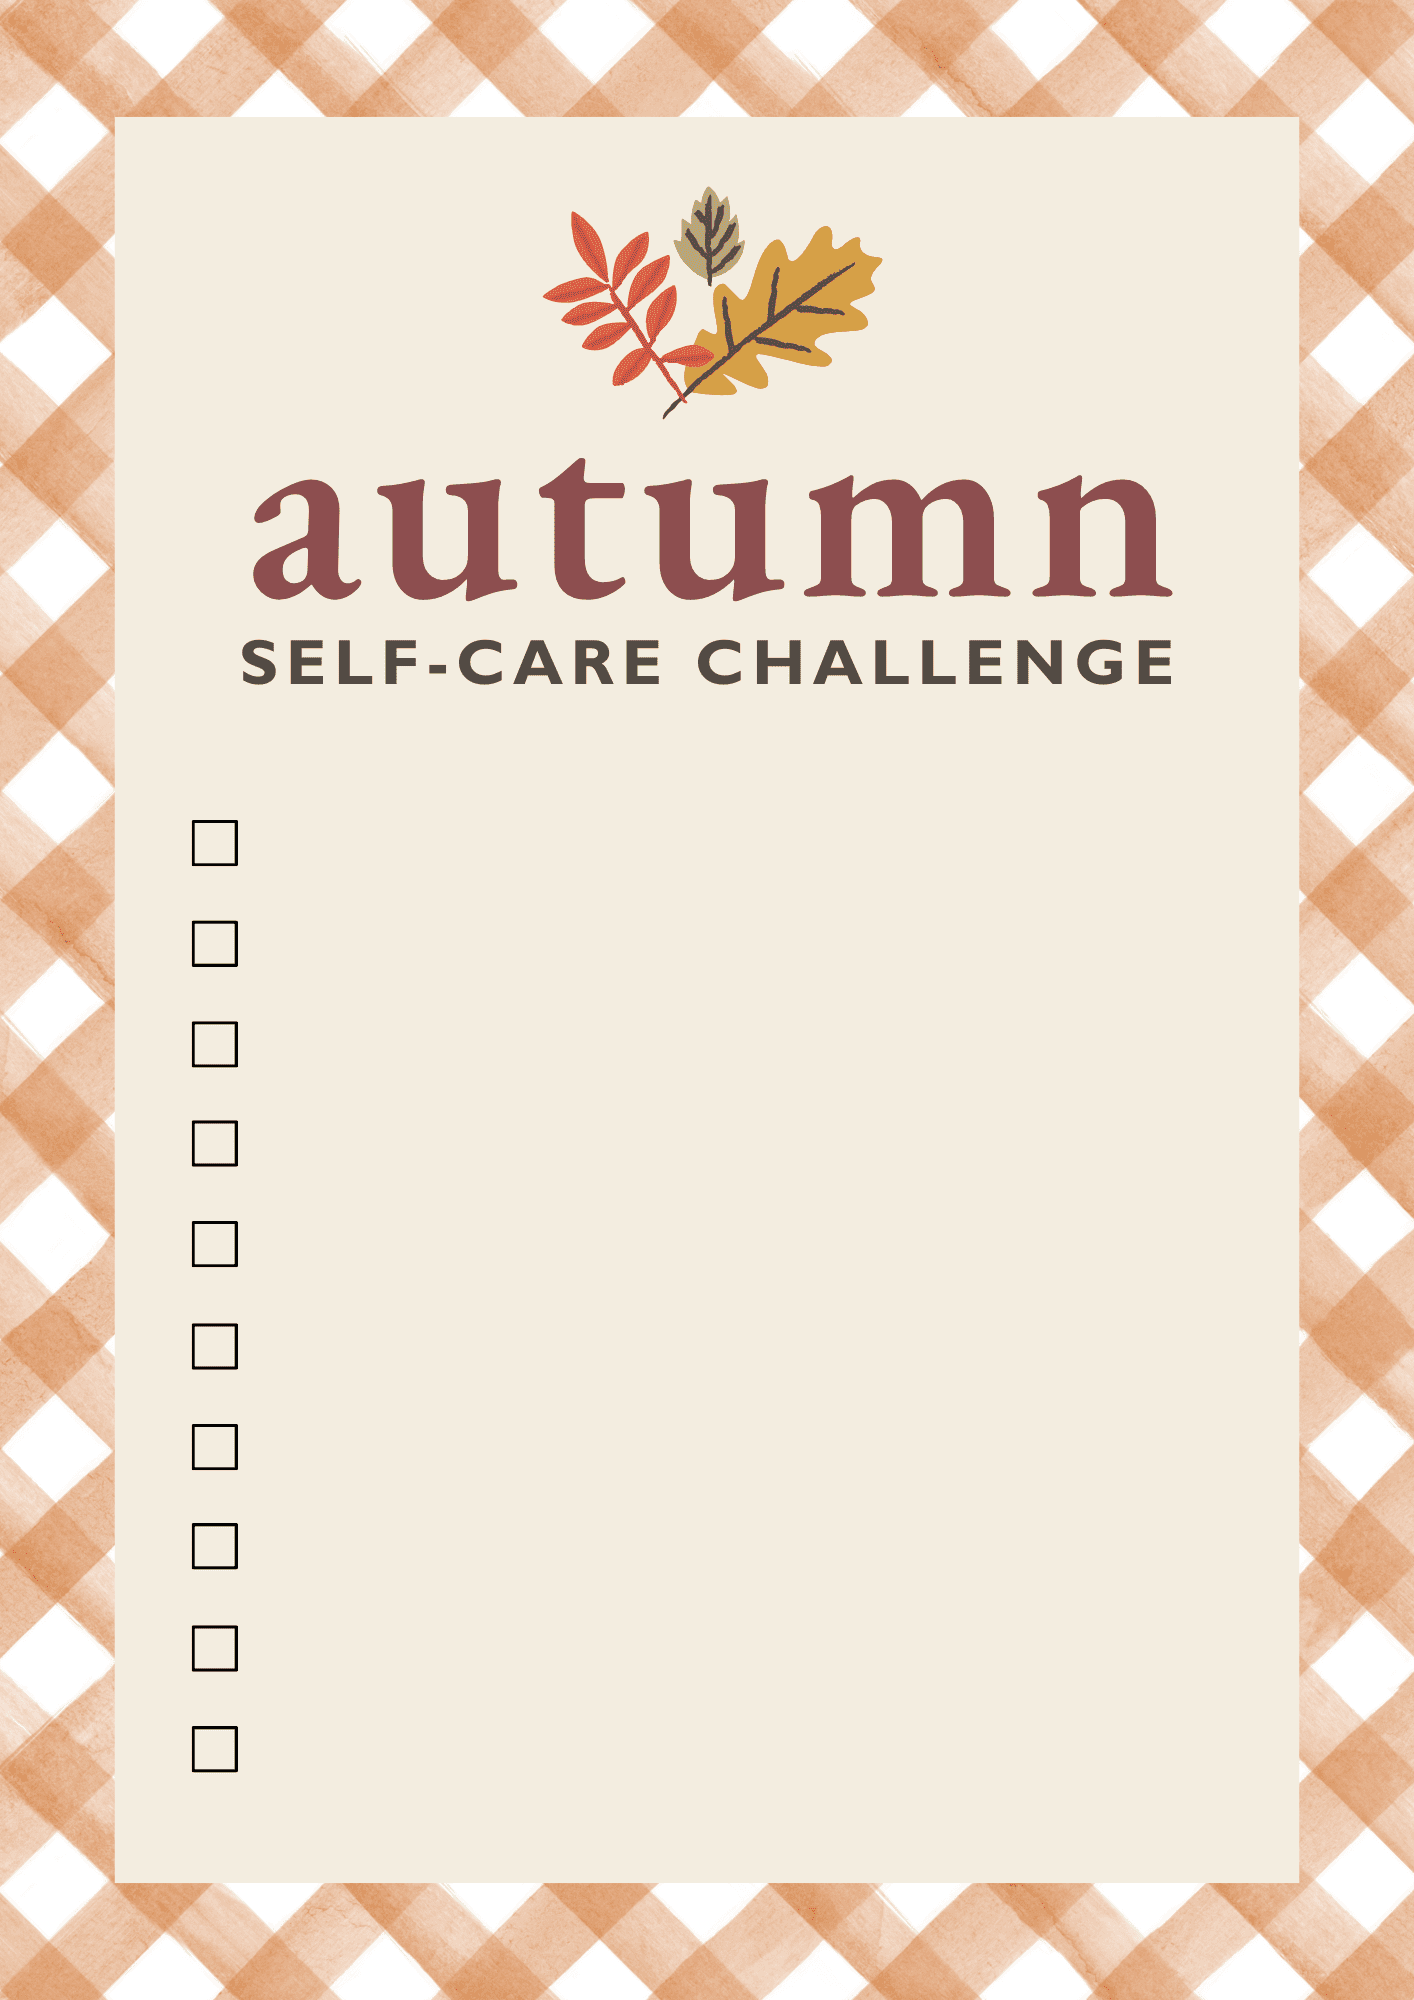 Autumn self care challenge template with a checklist for social media and Instagram stories